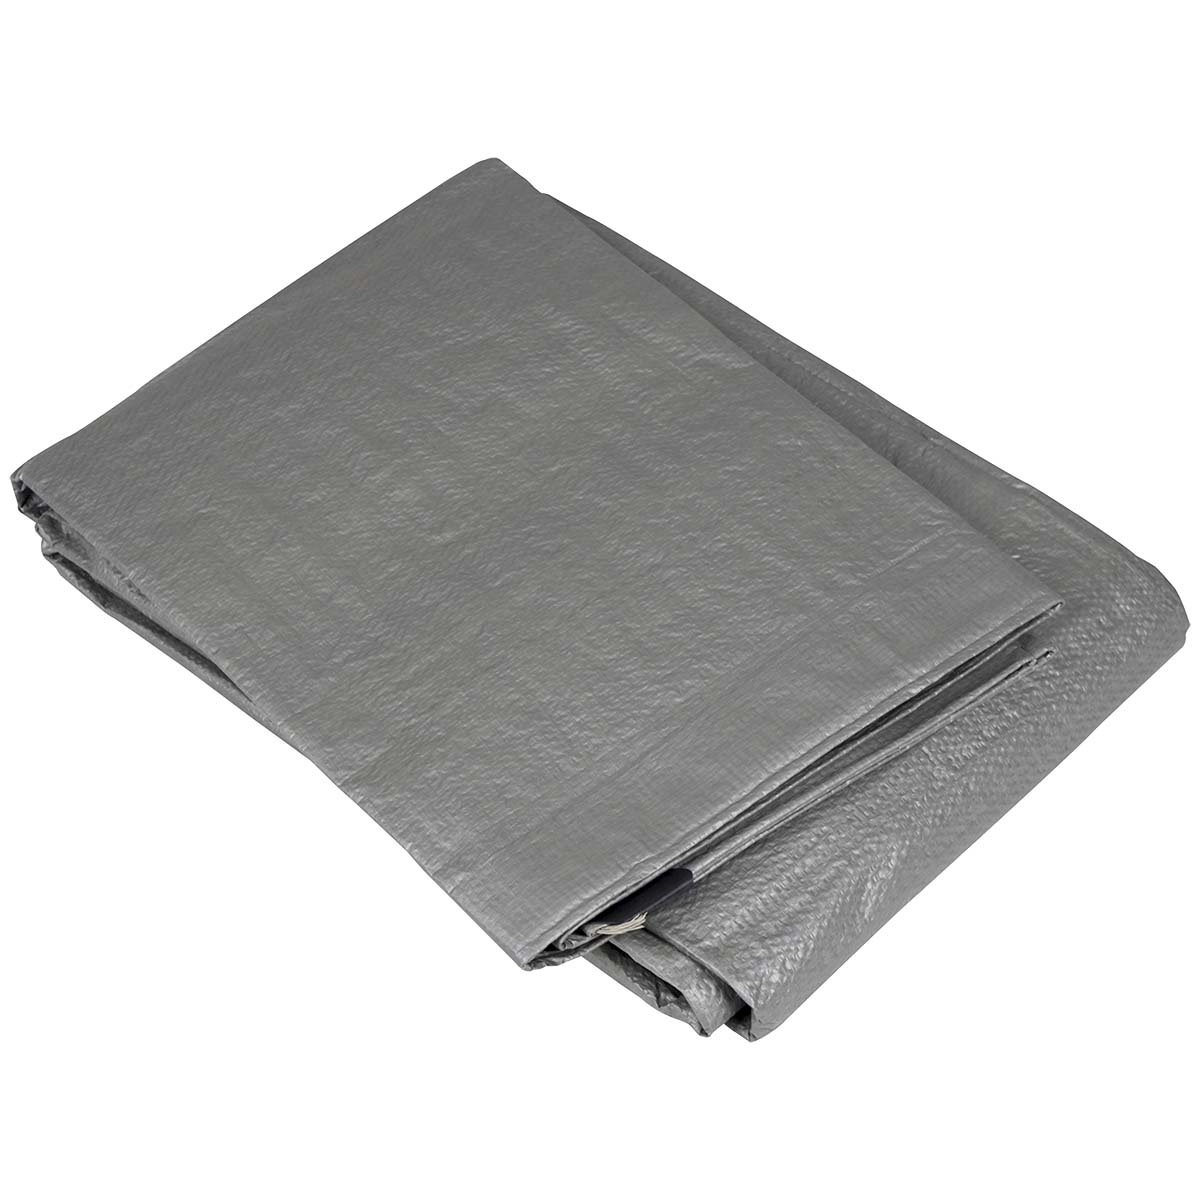 4215900 A sturdy cover sail. This sail is water proof, weather proof and high quality (120 gr/m²). With welded seams, reinforced edges and sturdy eyelets.